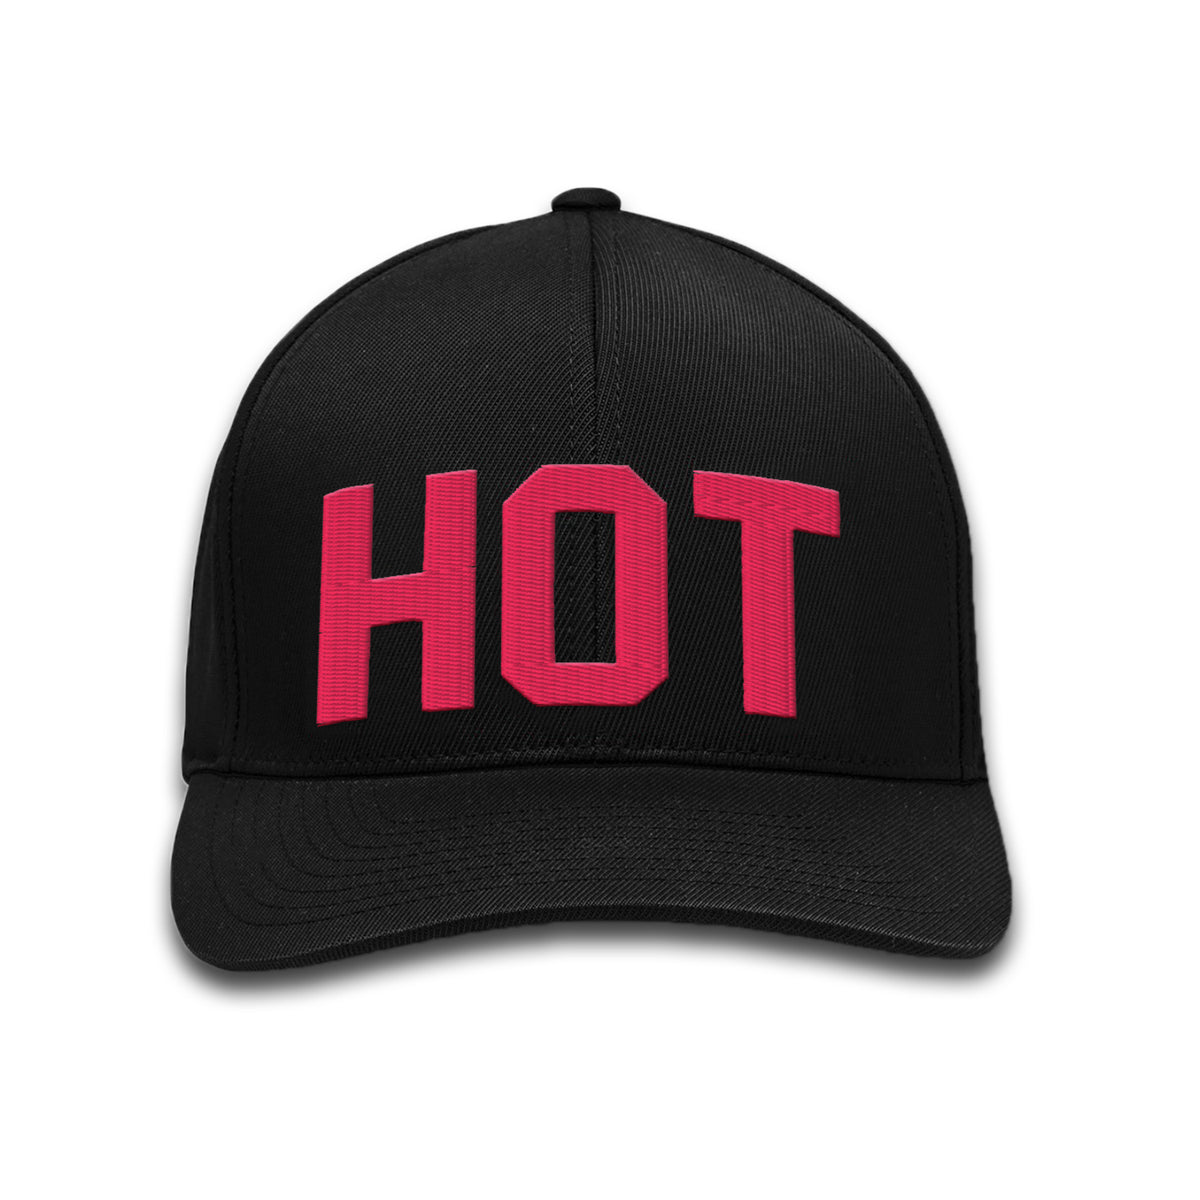 black snapback hat from GFORE that has red HOT lettered on the front